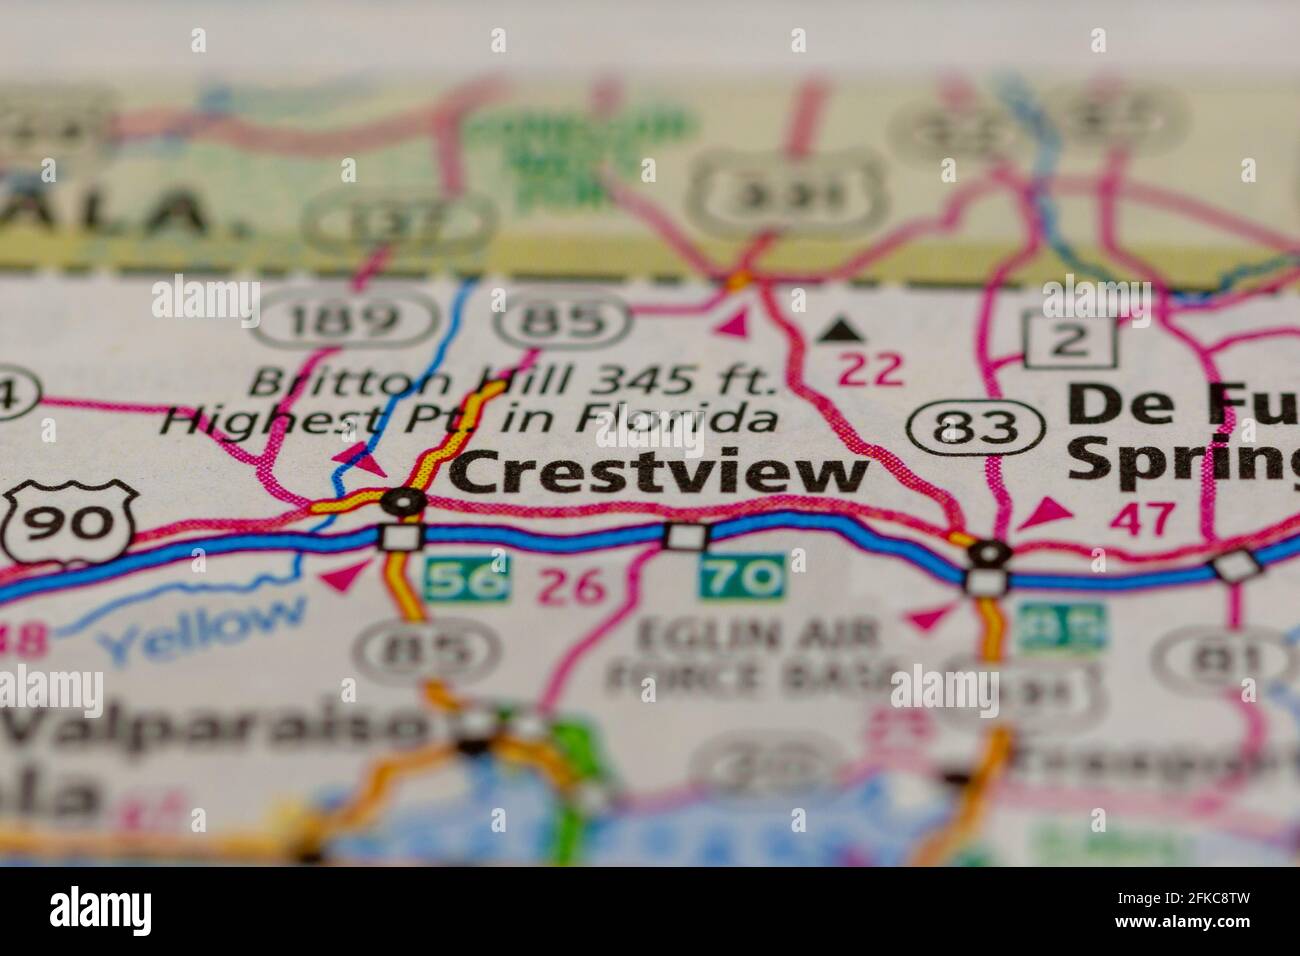 Crestview Florida USA Shown on a geography map or road map Stock Photo